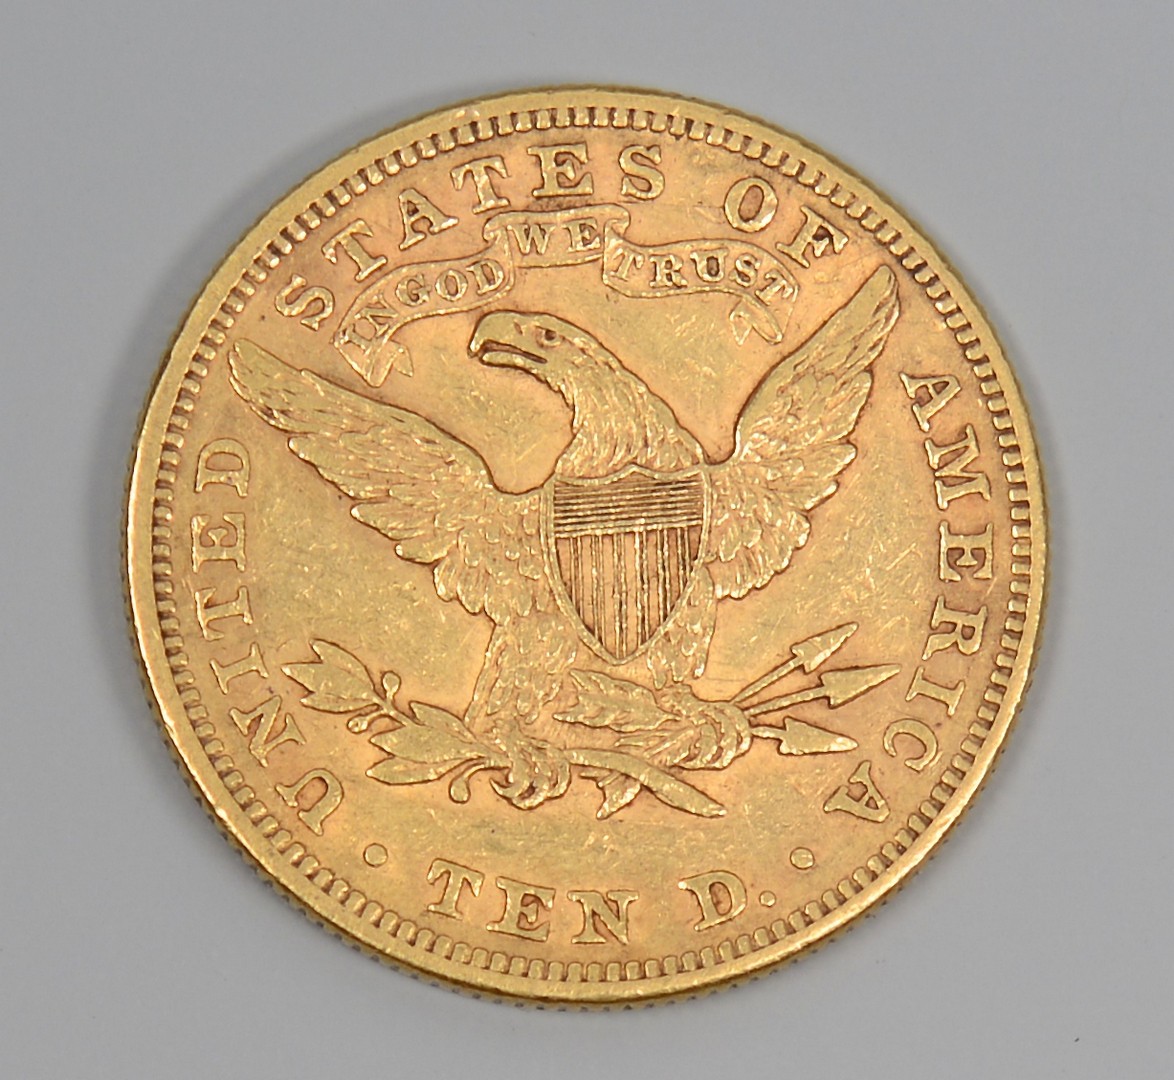 Lot 859: 1894 US $10 Liberty Head Gold Coin